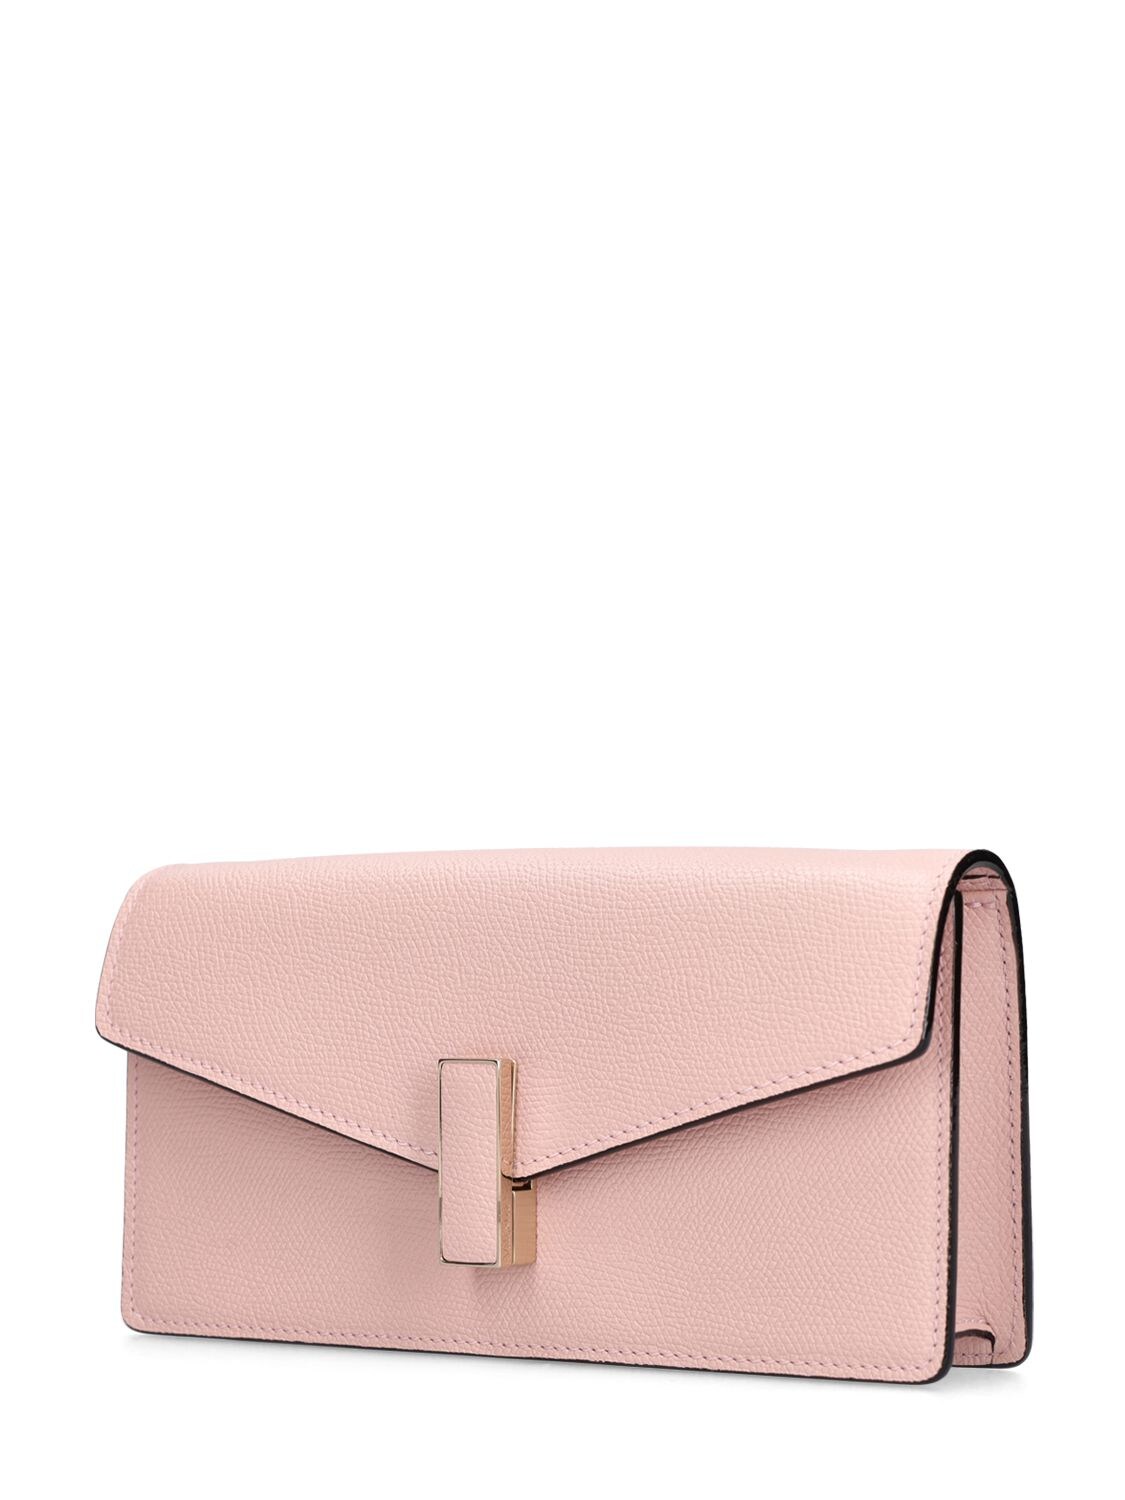 Shop Valextra New Iside Clutch W/chain In Peonia